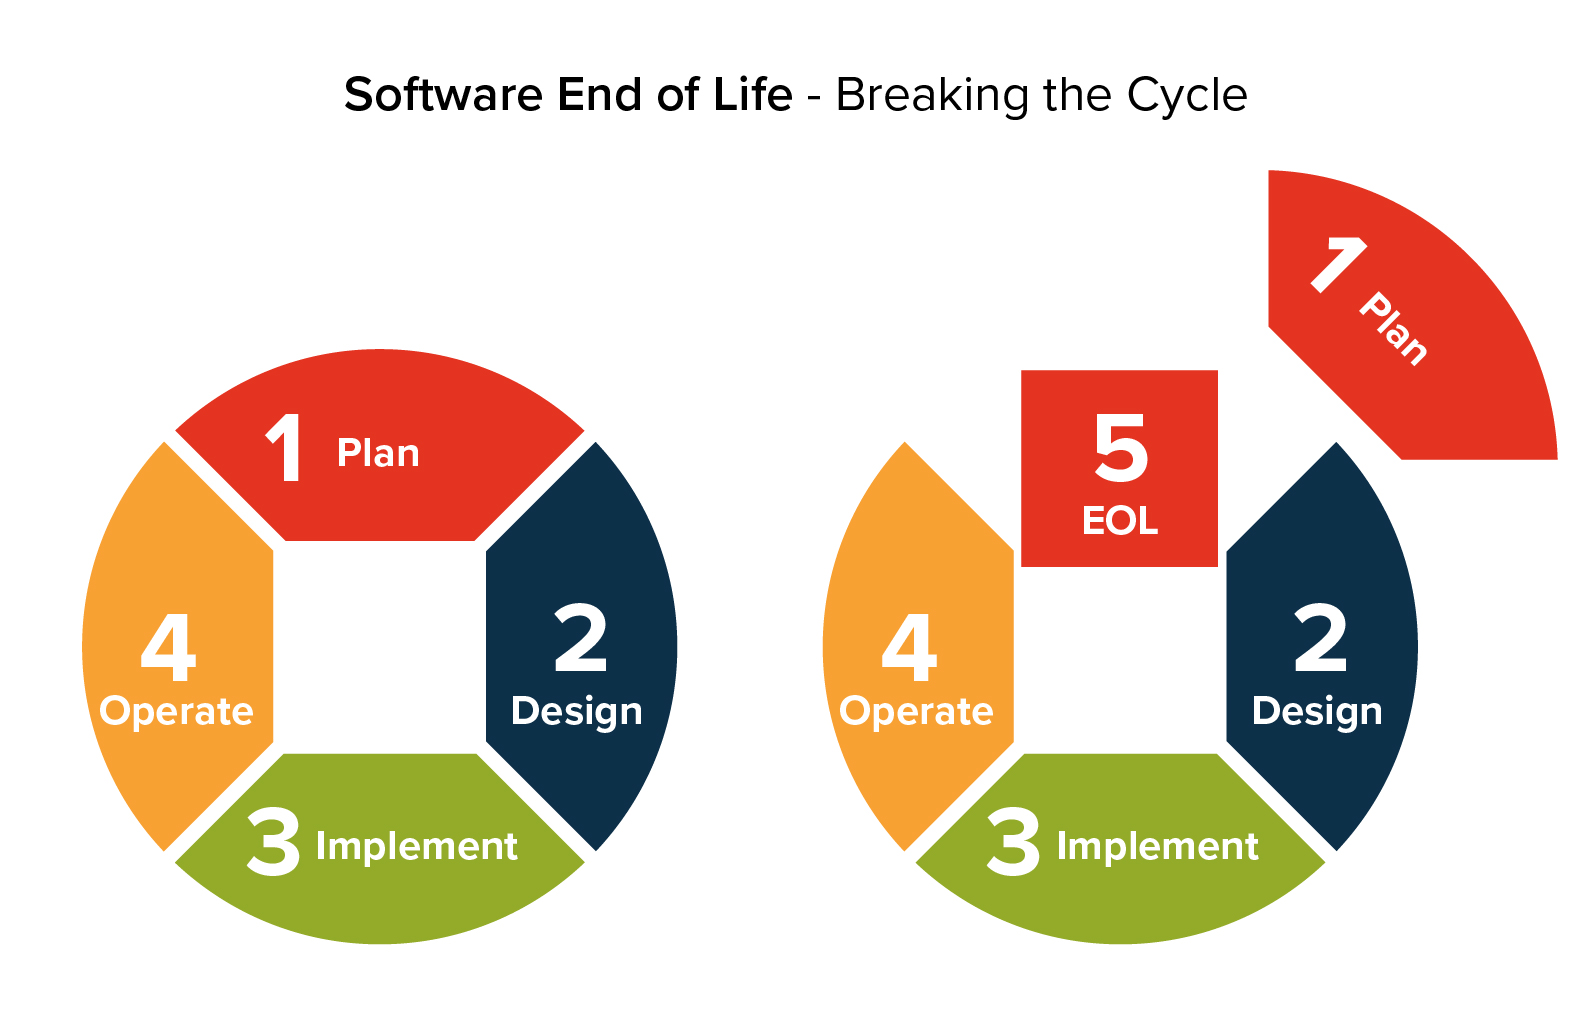 Software End of Life - Breaking the Cycle